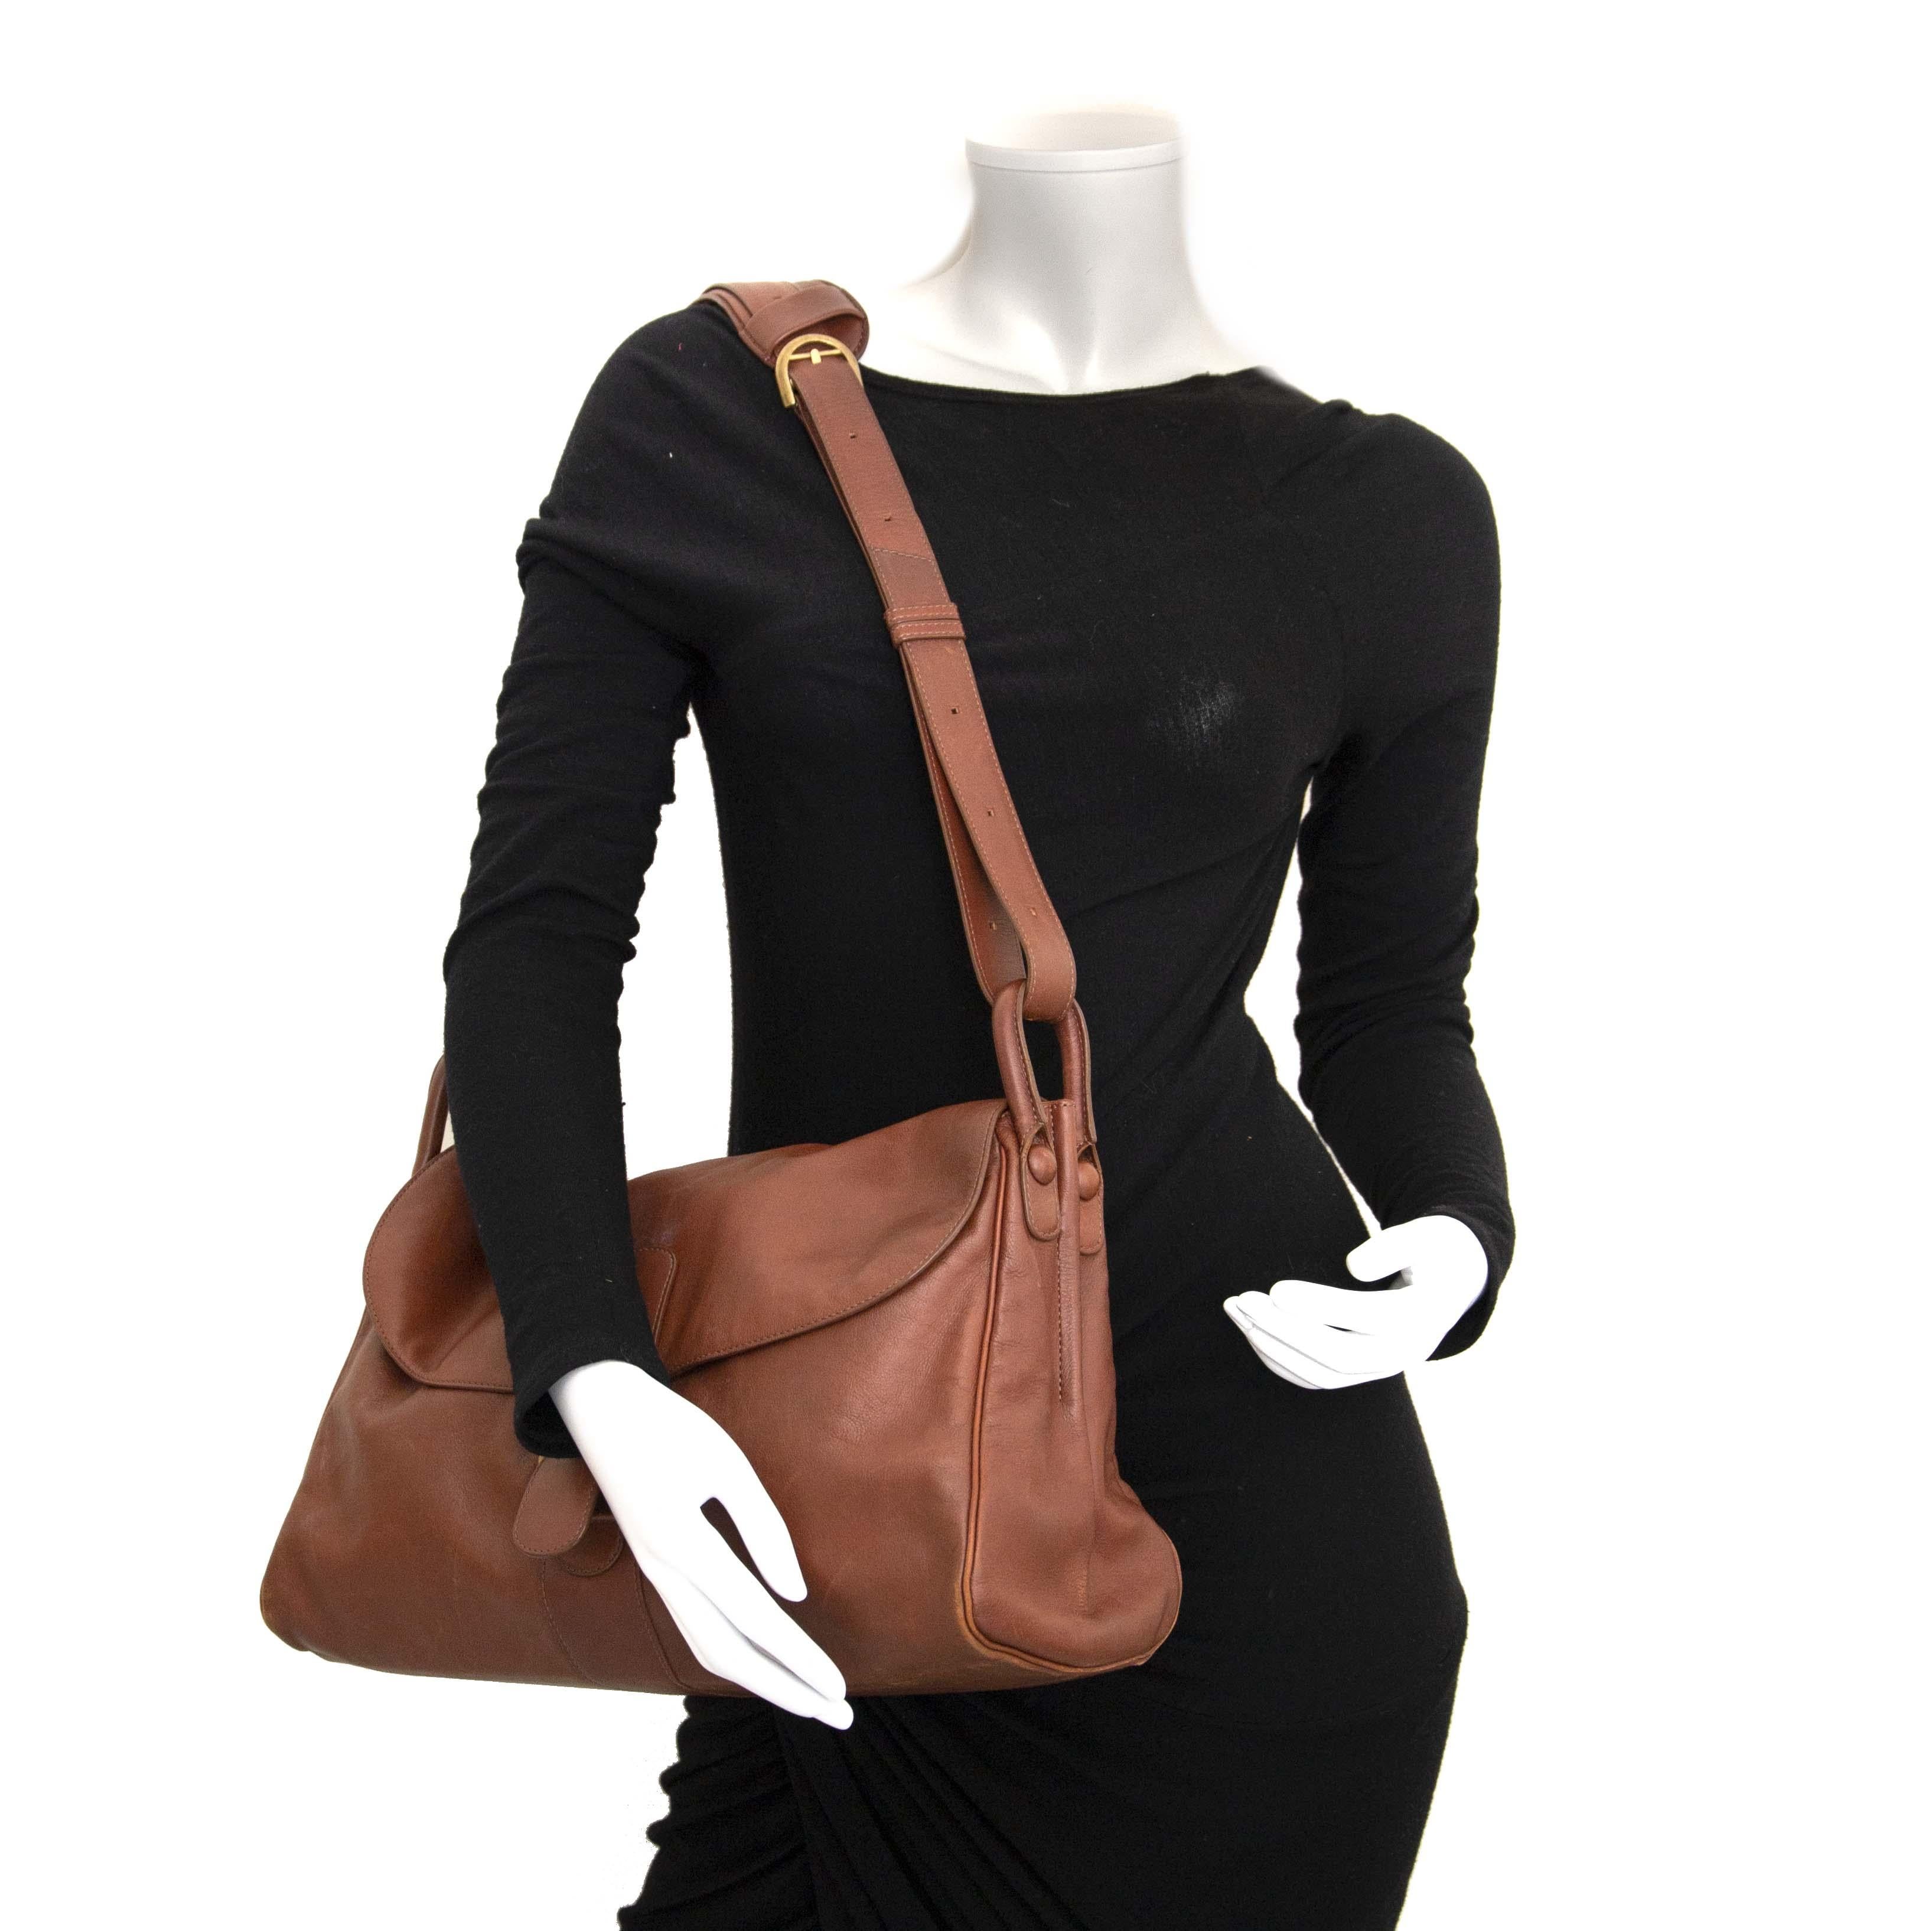 Delvaux Brillant Brown Shoulder Bag In Excellent Condition For Sale In Antwerp, BE